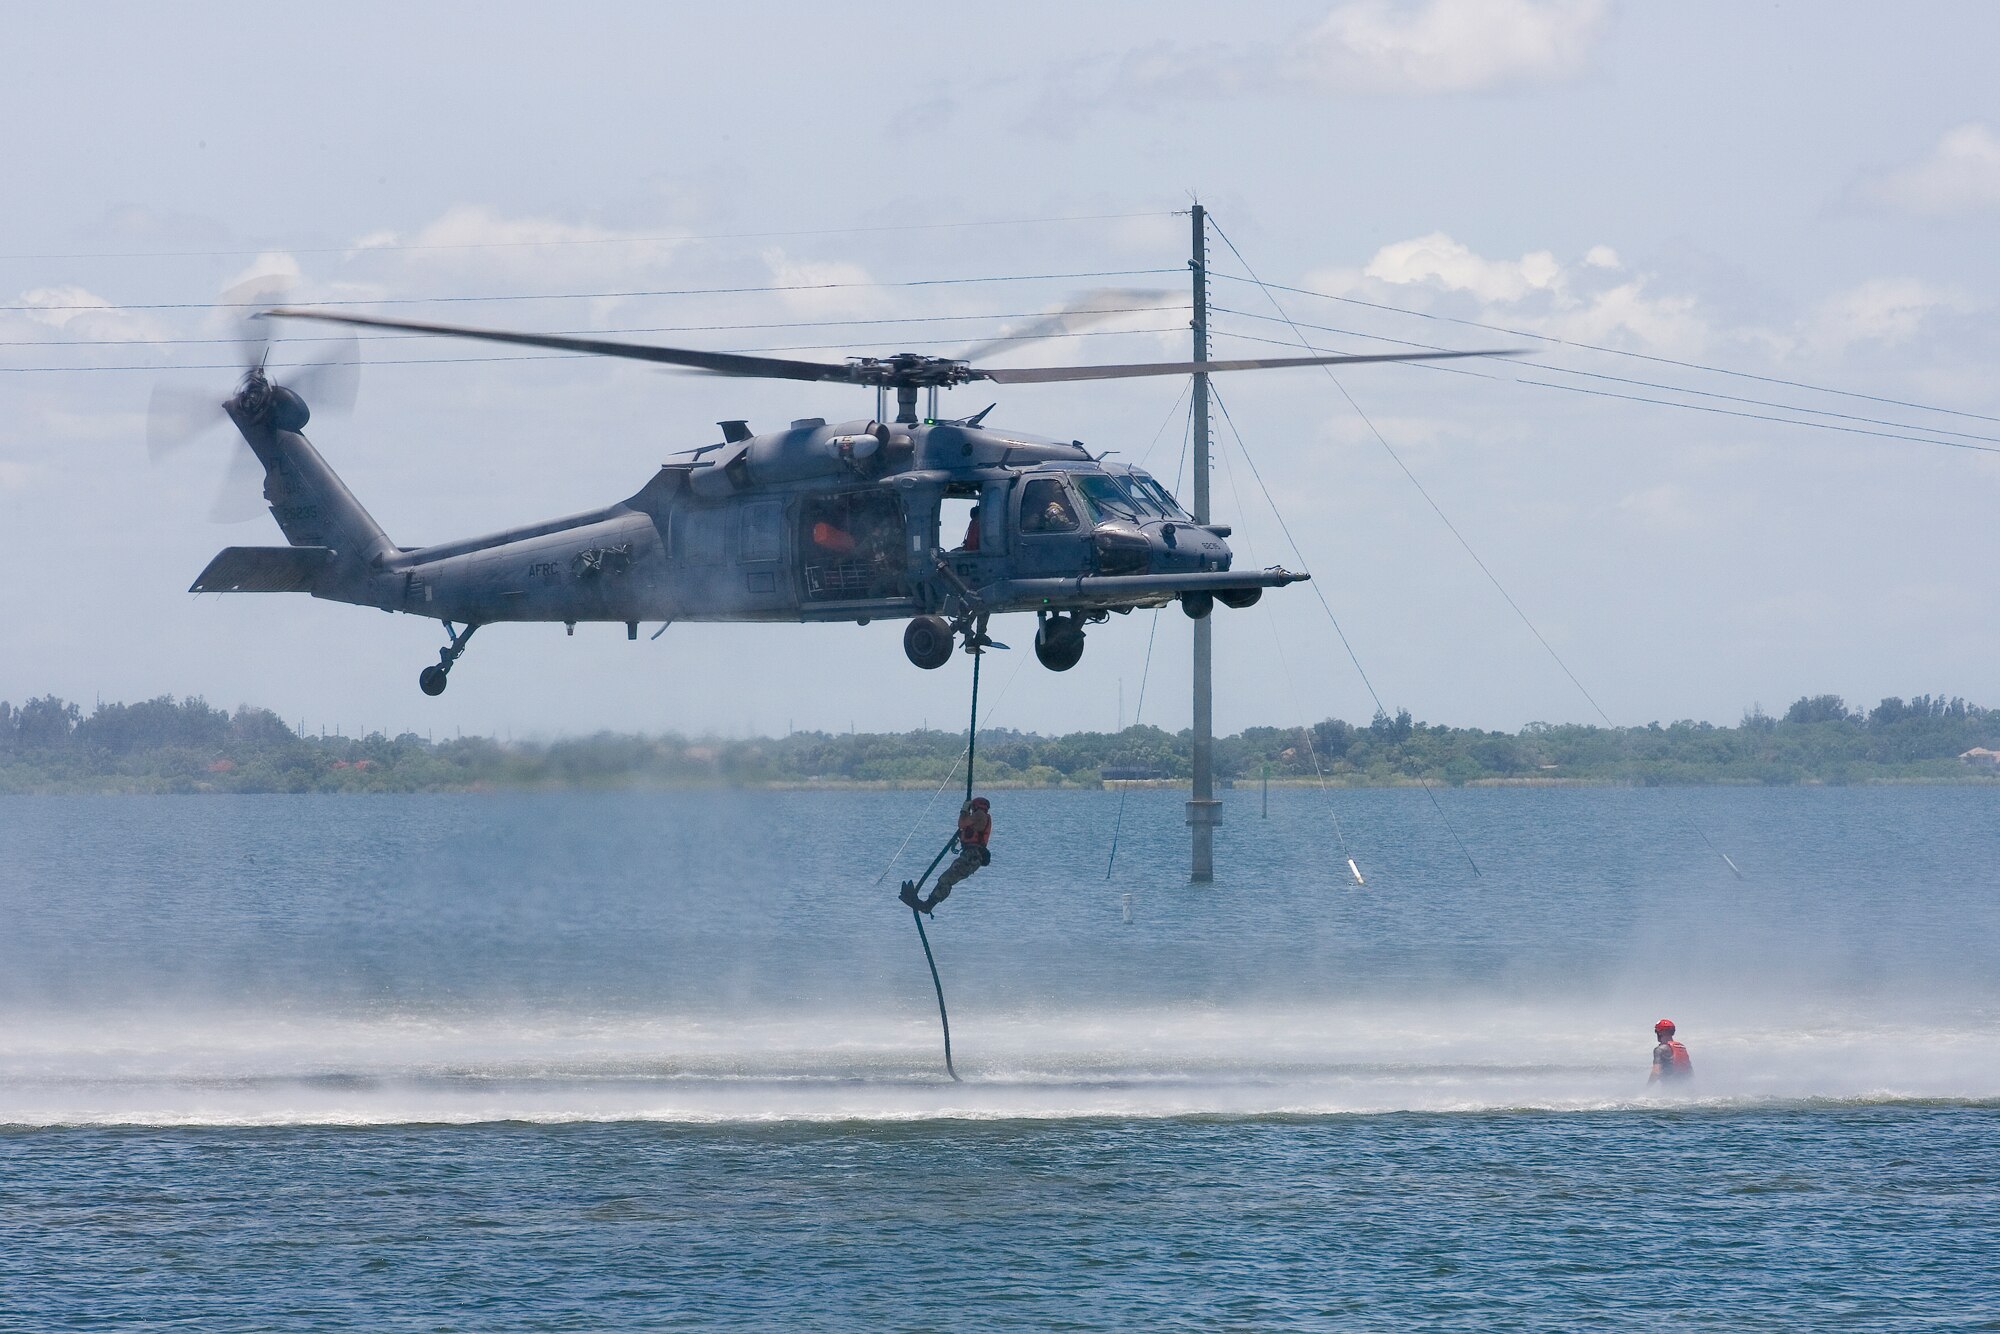 PATRICK AFB, Fla. --  Air Force Reserve pararescuemen from the 920th Rescue Wing here perform water rescue training in the Banana River east of Patrick Air Force Base during their an Employer and Family Day event.  Due to long deployments, families and civilian employes of Reservists are required to make sacrifices to support national defense. Their military commitment requires Reservists to juggle a myriad of tasks to include balancing their family, career and selfless service to their country.  Volunteerism will remain the hallmark of the Air Force Reserve.   (U.S. Air Force photo / Tech. Sgt. Jeremy Allen)